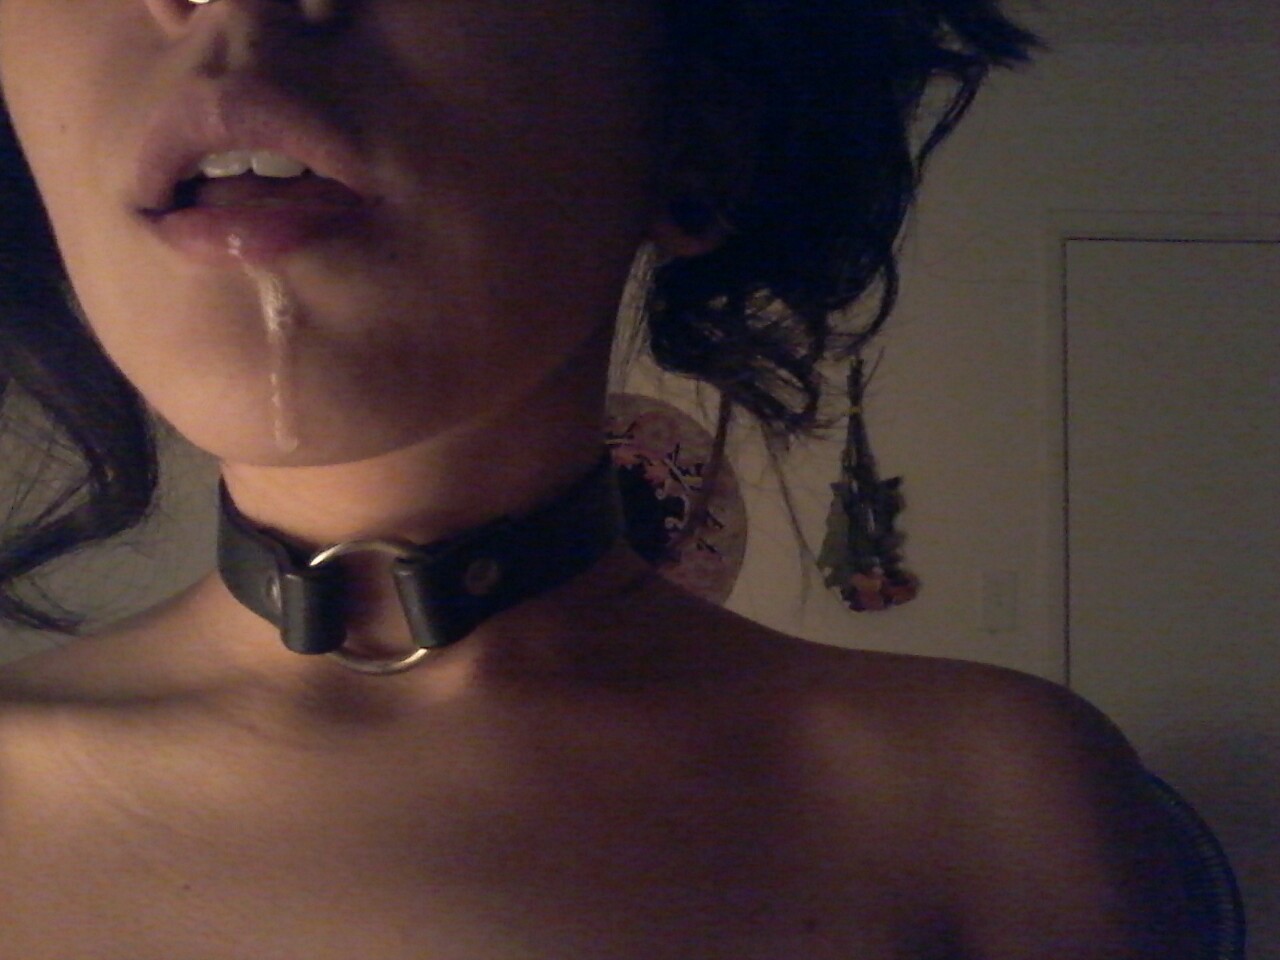 Choker necklaces sucking dick